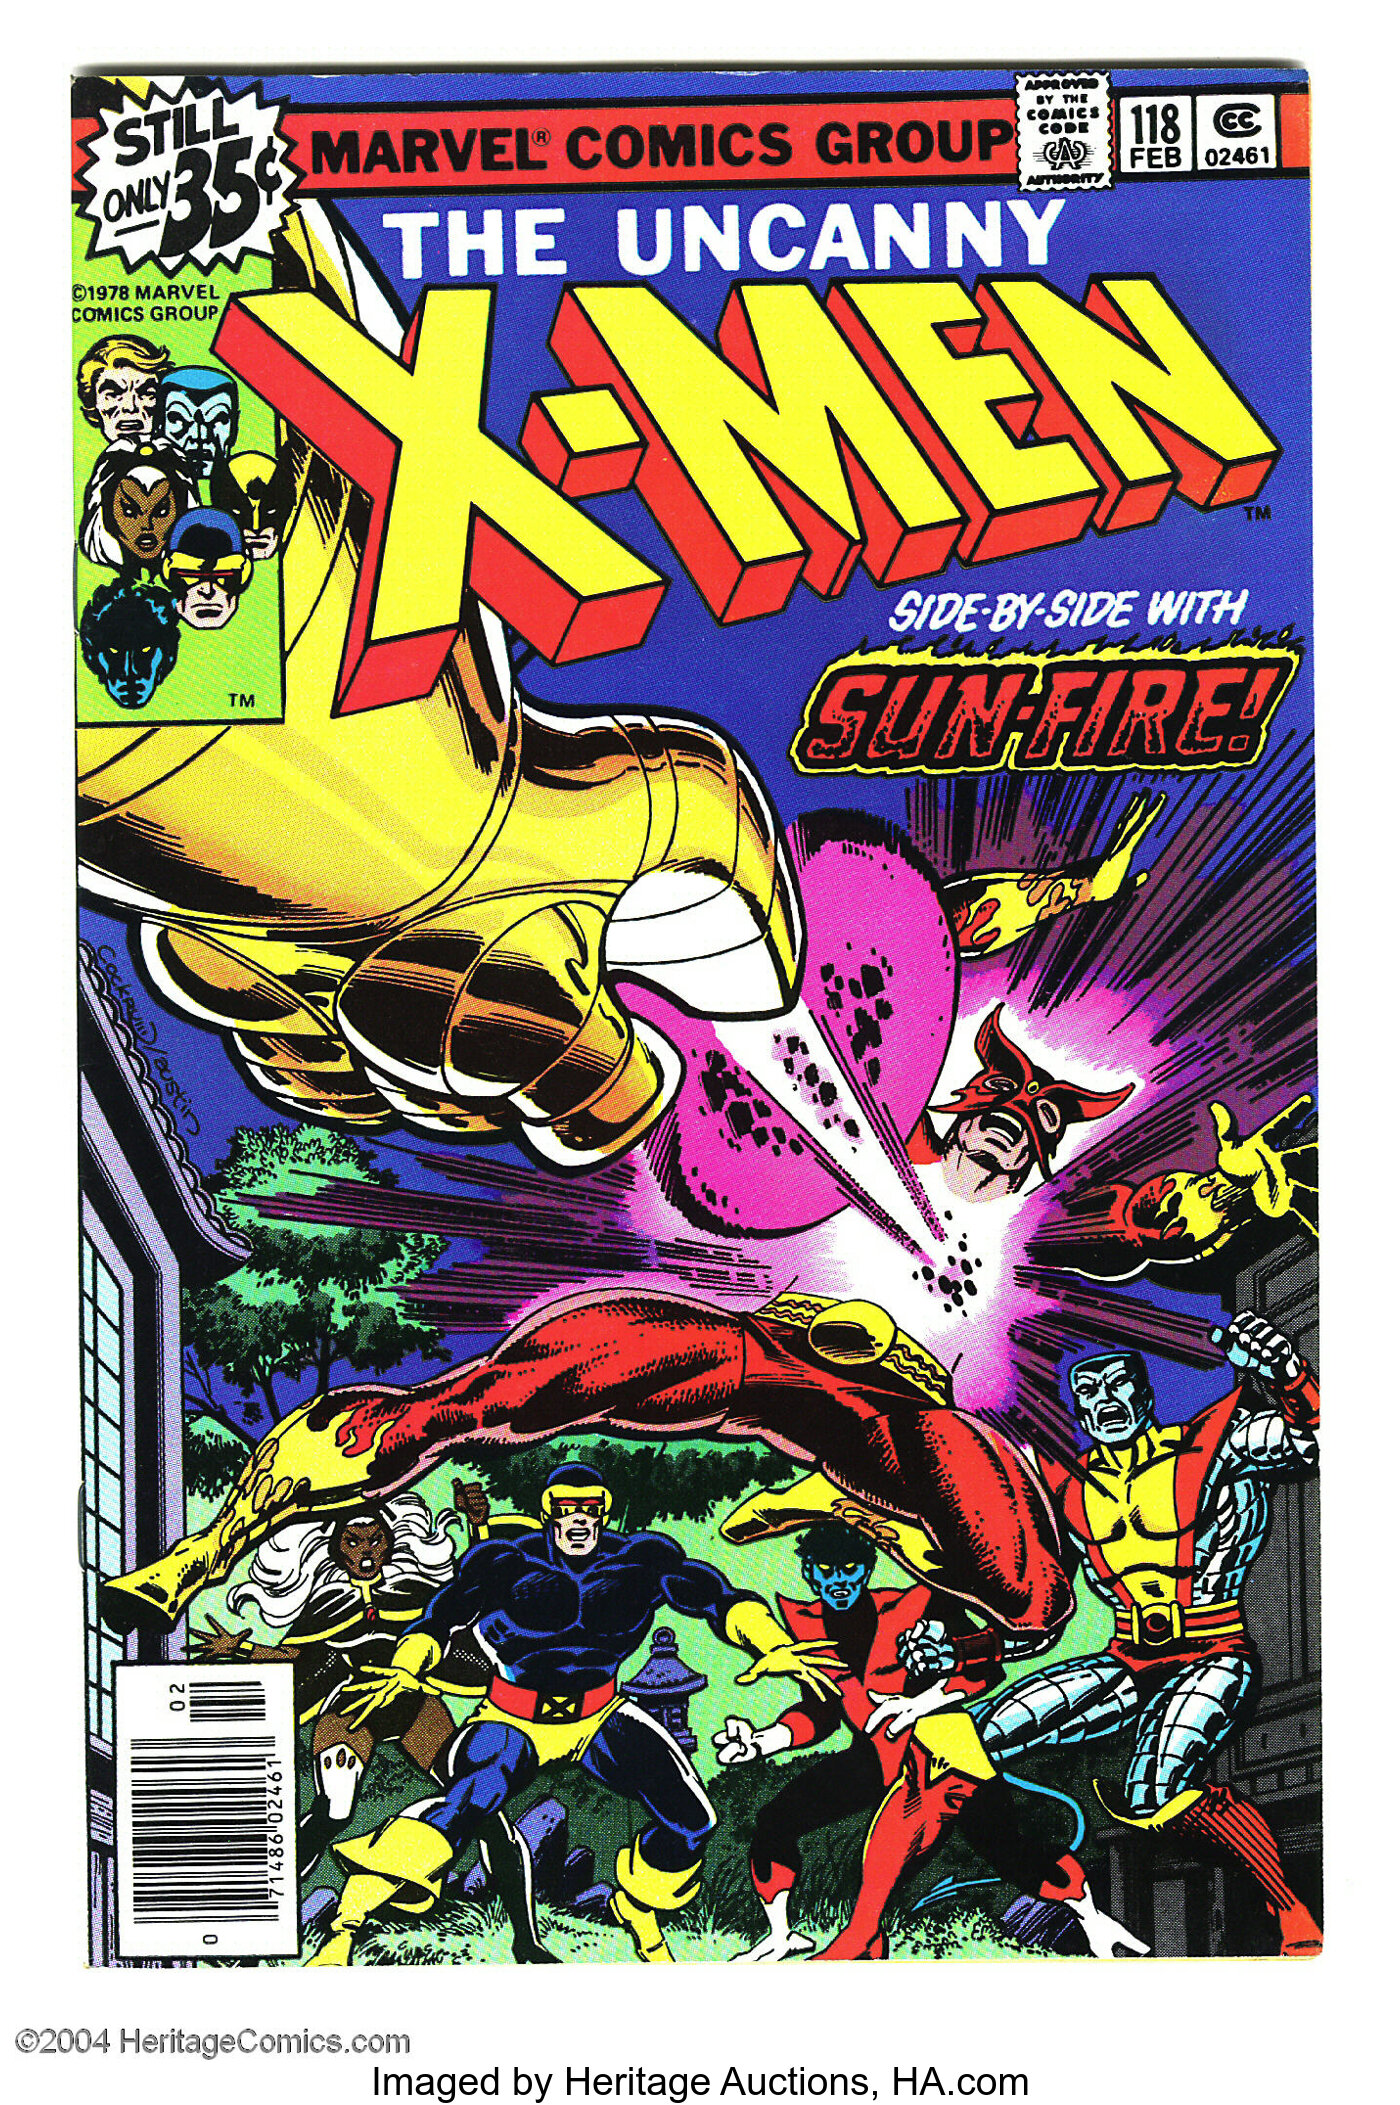 X-Men #118 (Marvel, 1979) Condition: VF/NM. Sun-Fire appearance